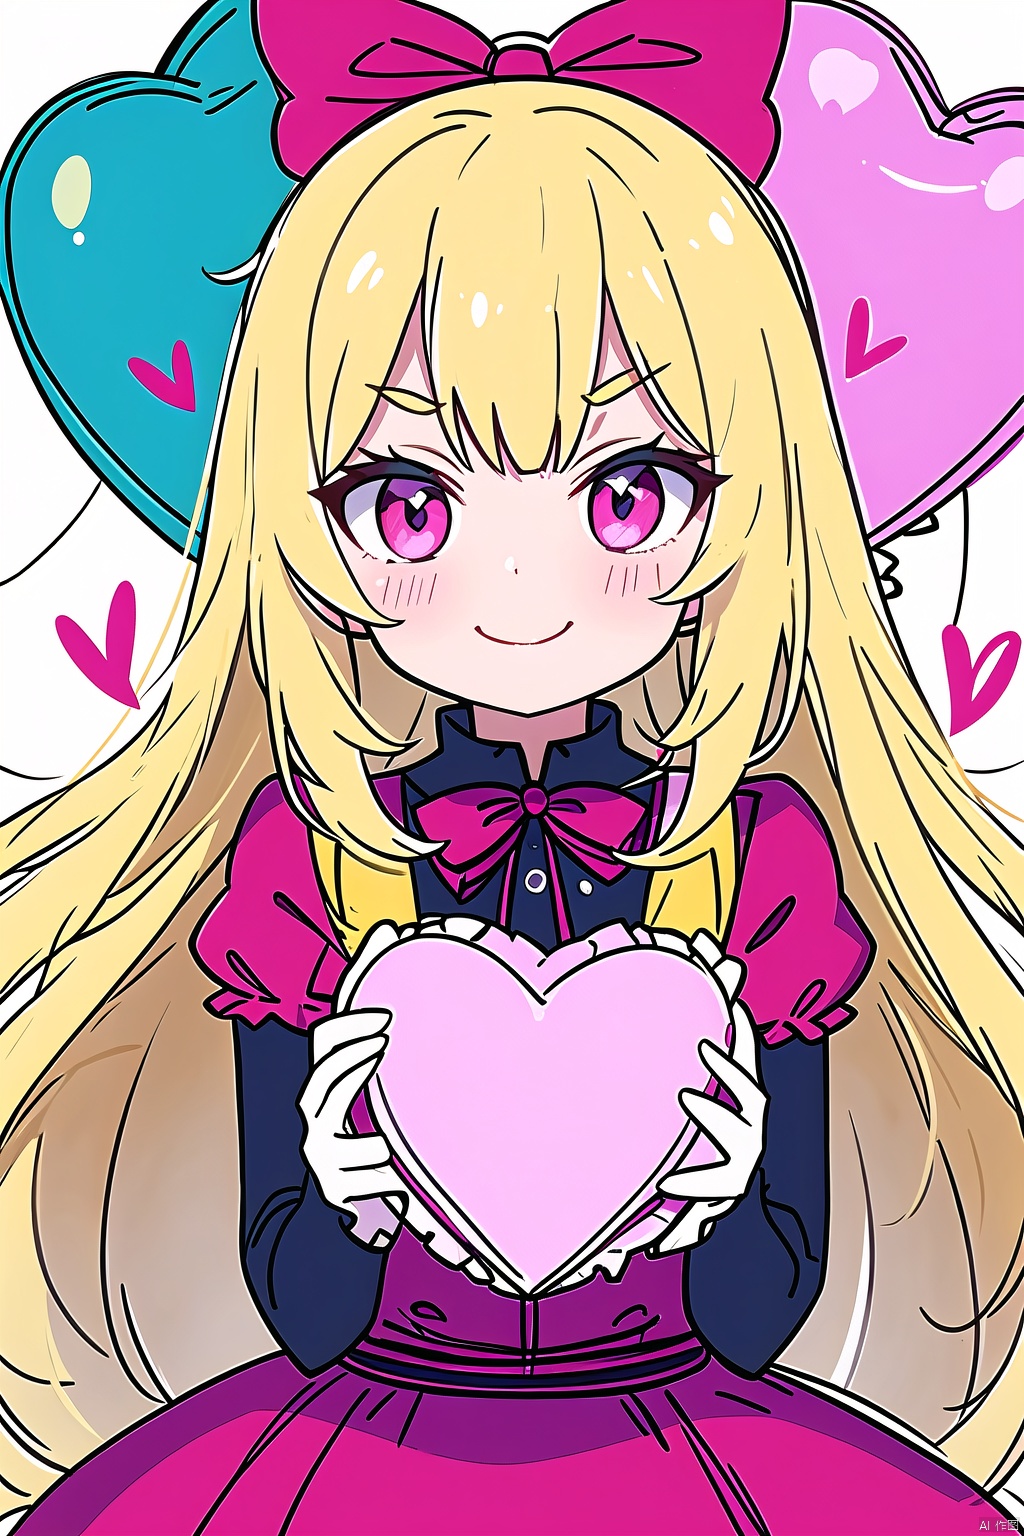  1girl, artist_name, balloon, bangs, blonde_hair, blush, bow, closed_mouth, dress, eyebrows_visible_through_hair, frills, gloves, heart, heart_balloon, heart_pillow, holding, long_hair, looking_at_viewer, one_eye_closed, pink_bow, simple_background, smile, solo, very_long_hair, white_background, masterpiece, Cluttered lines